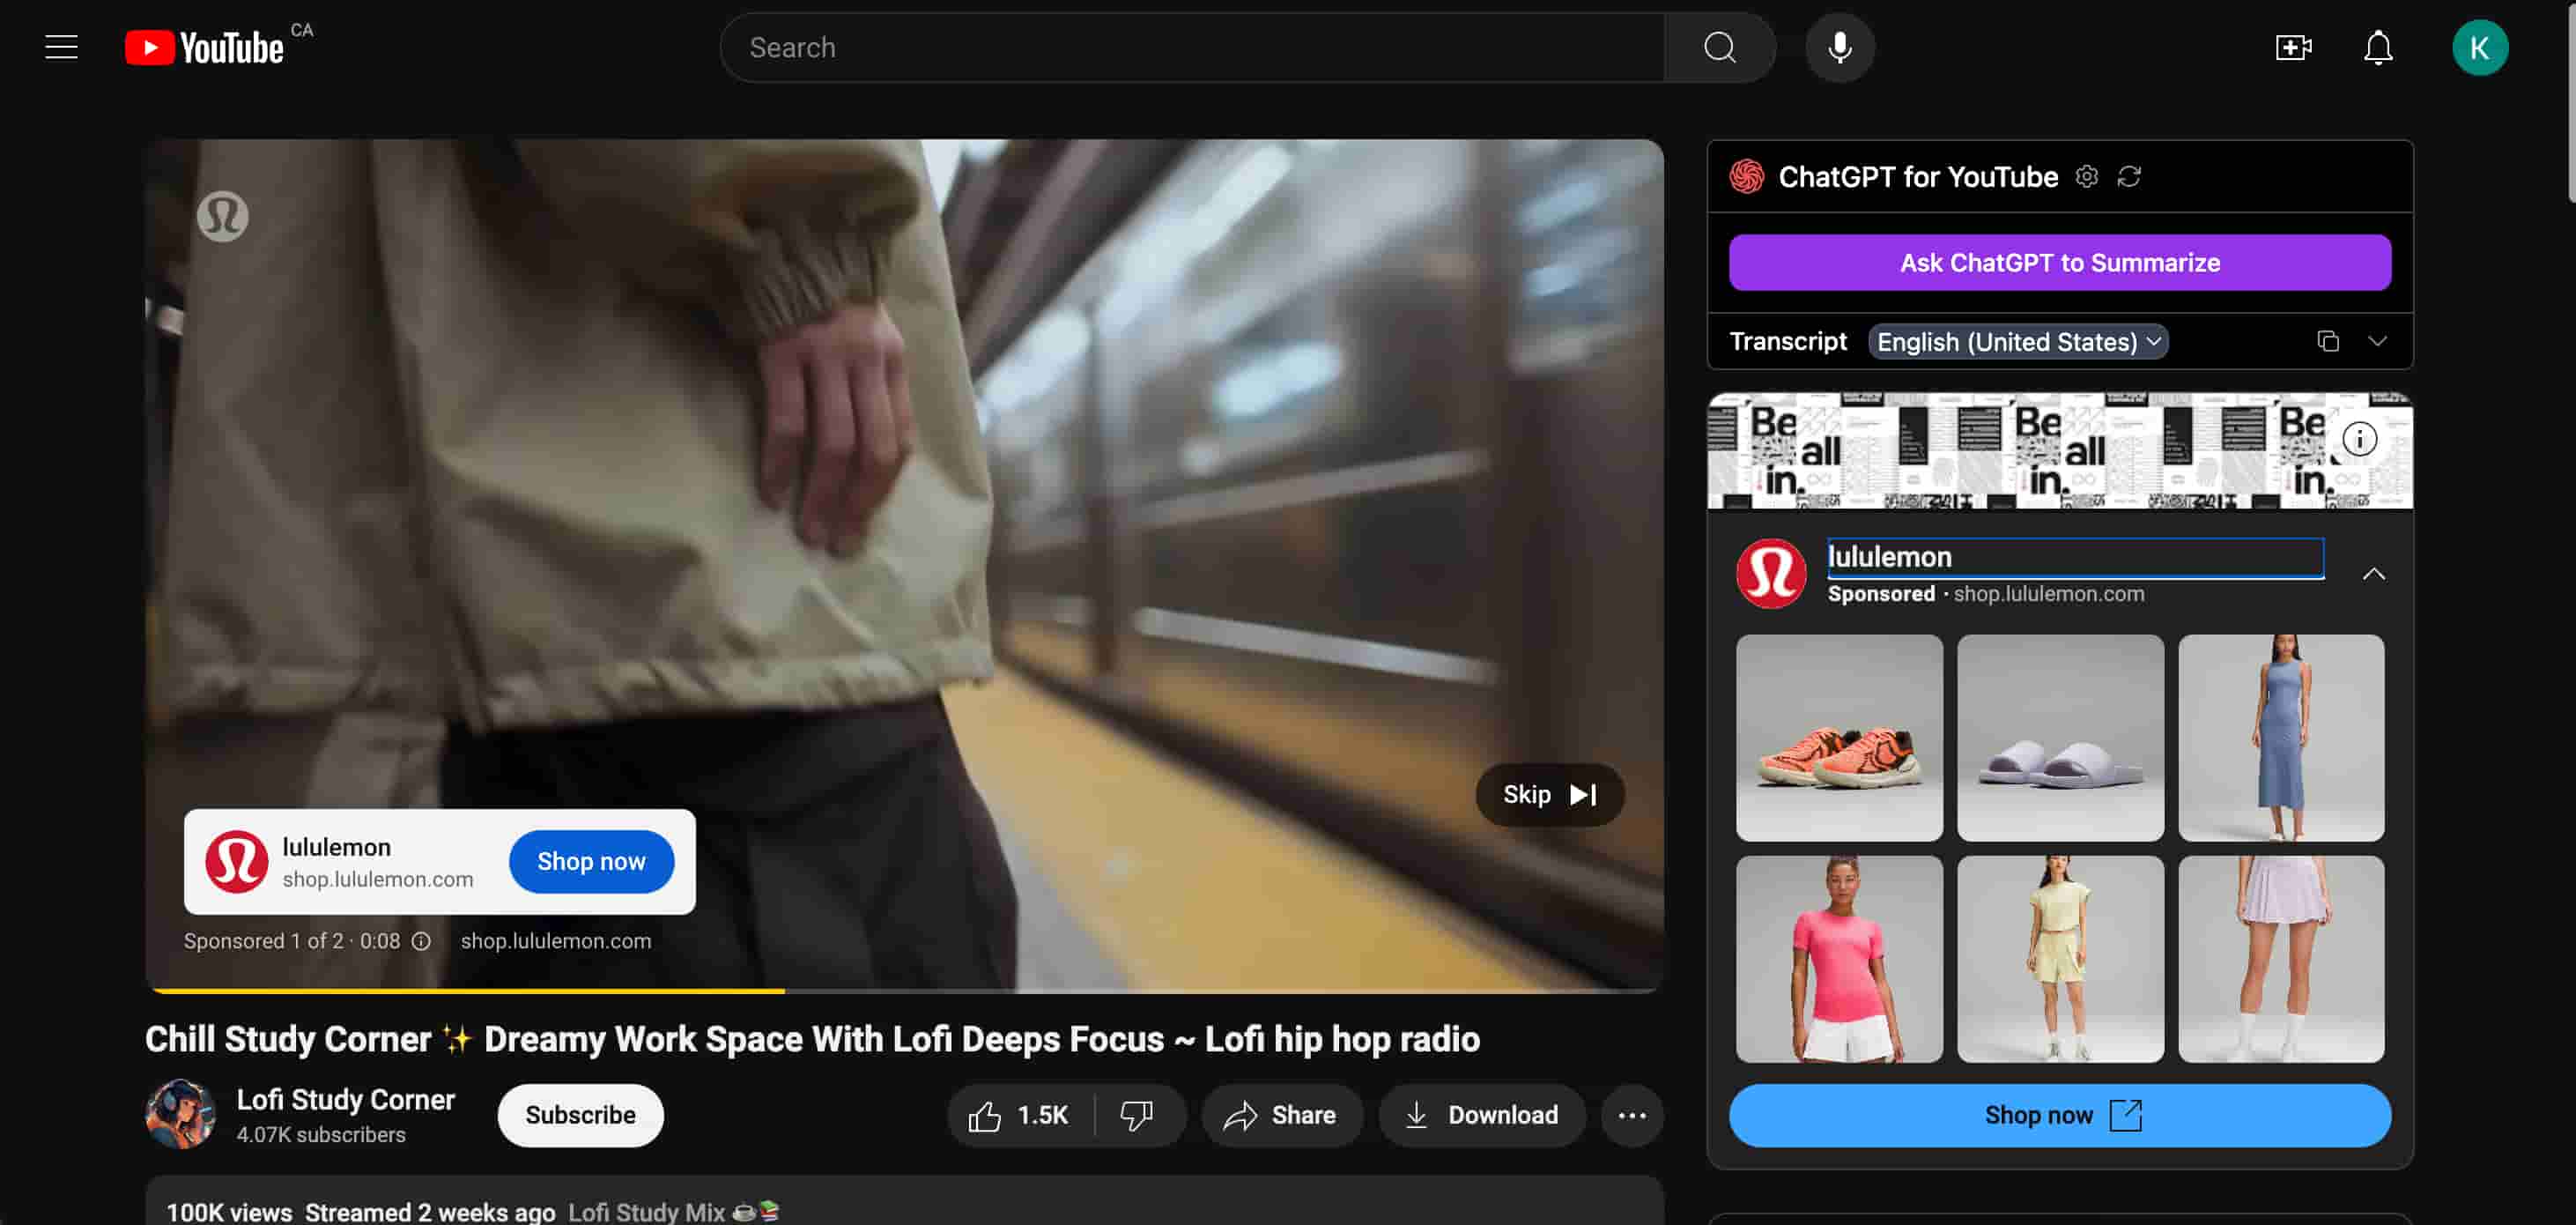 Example of a skippable in-stream YouTube ad